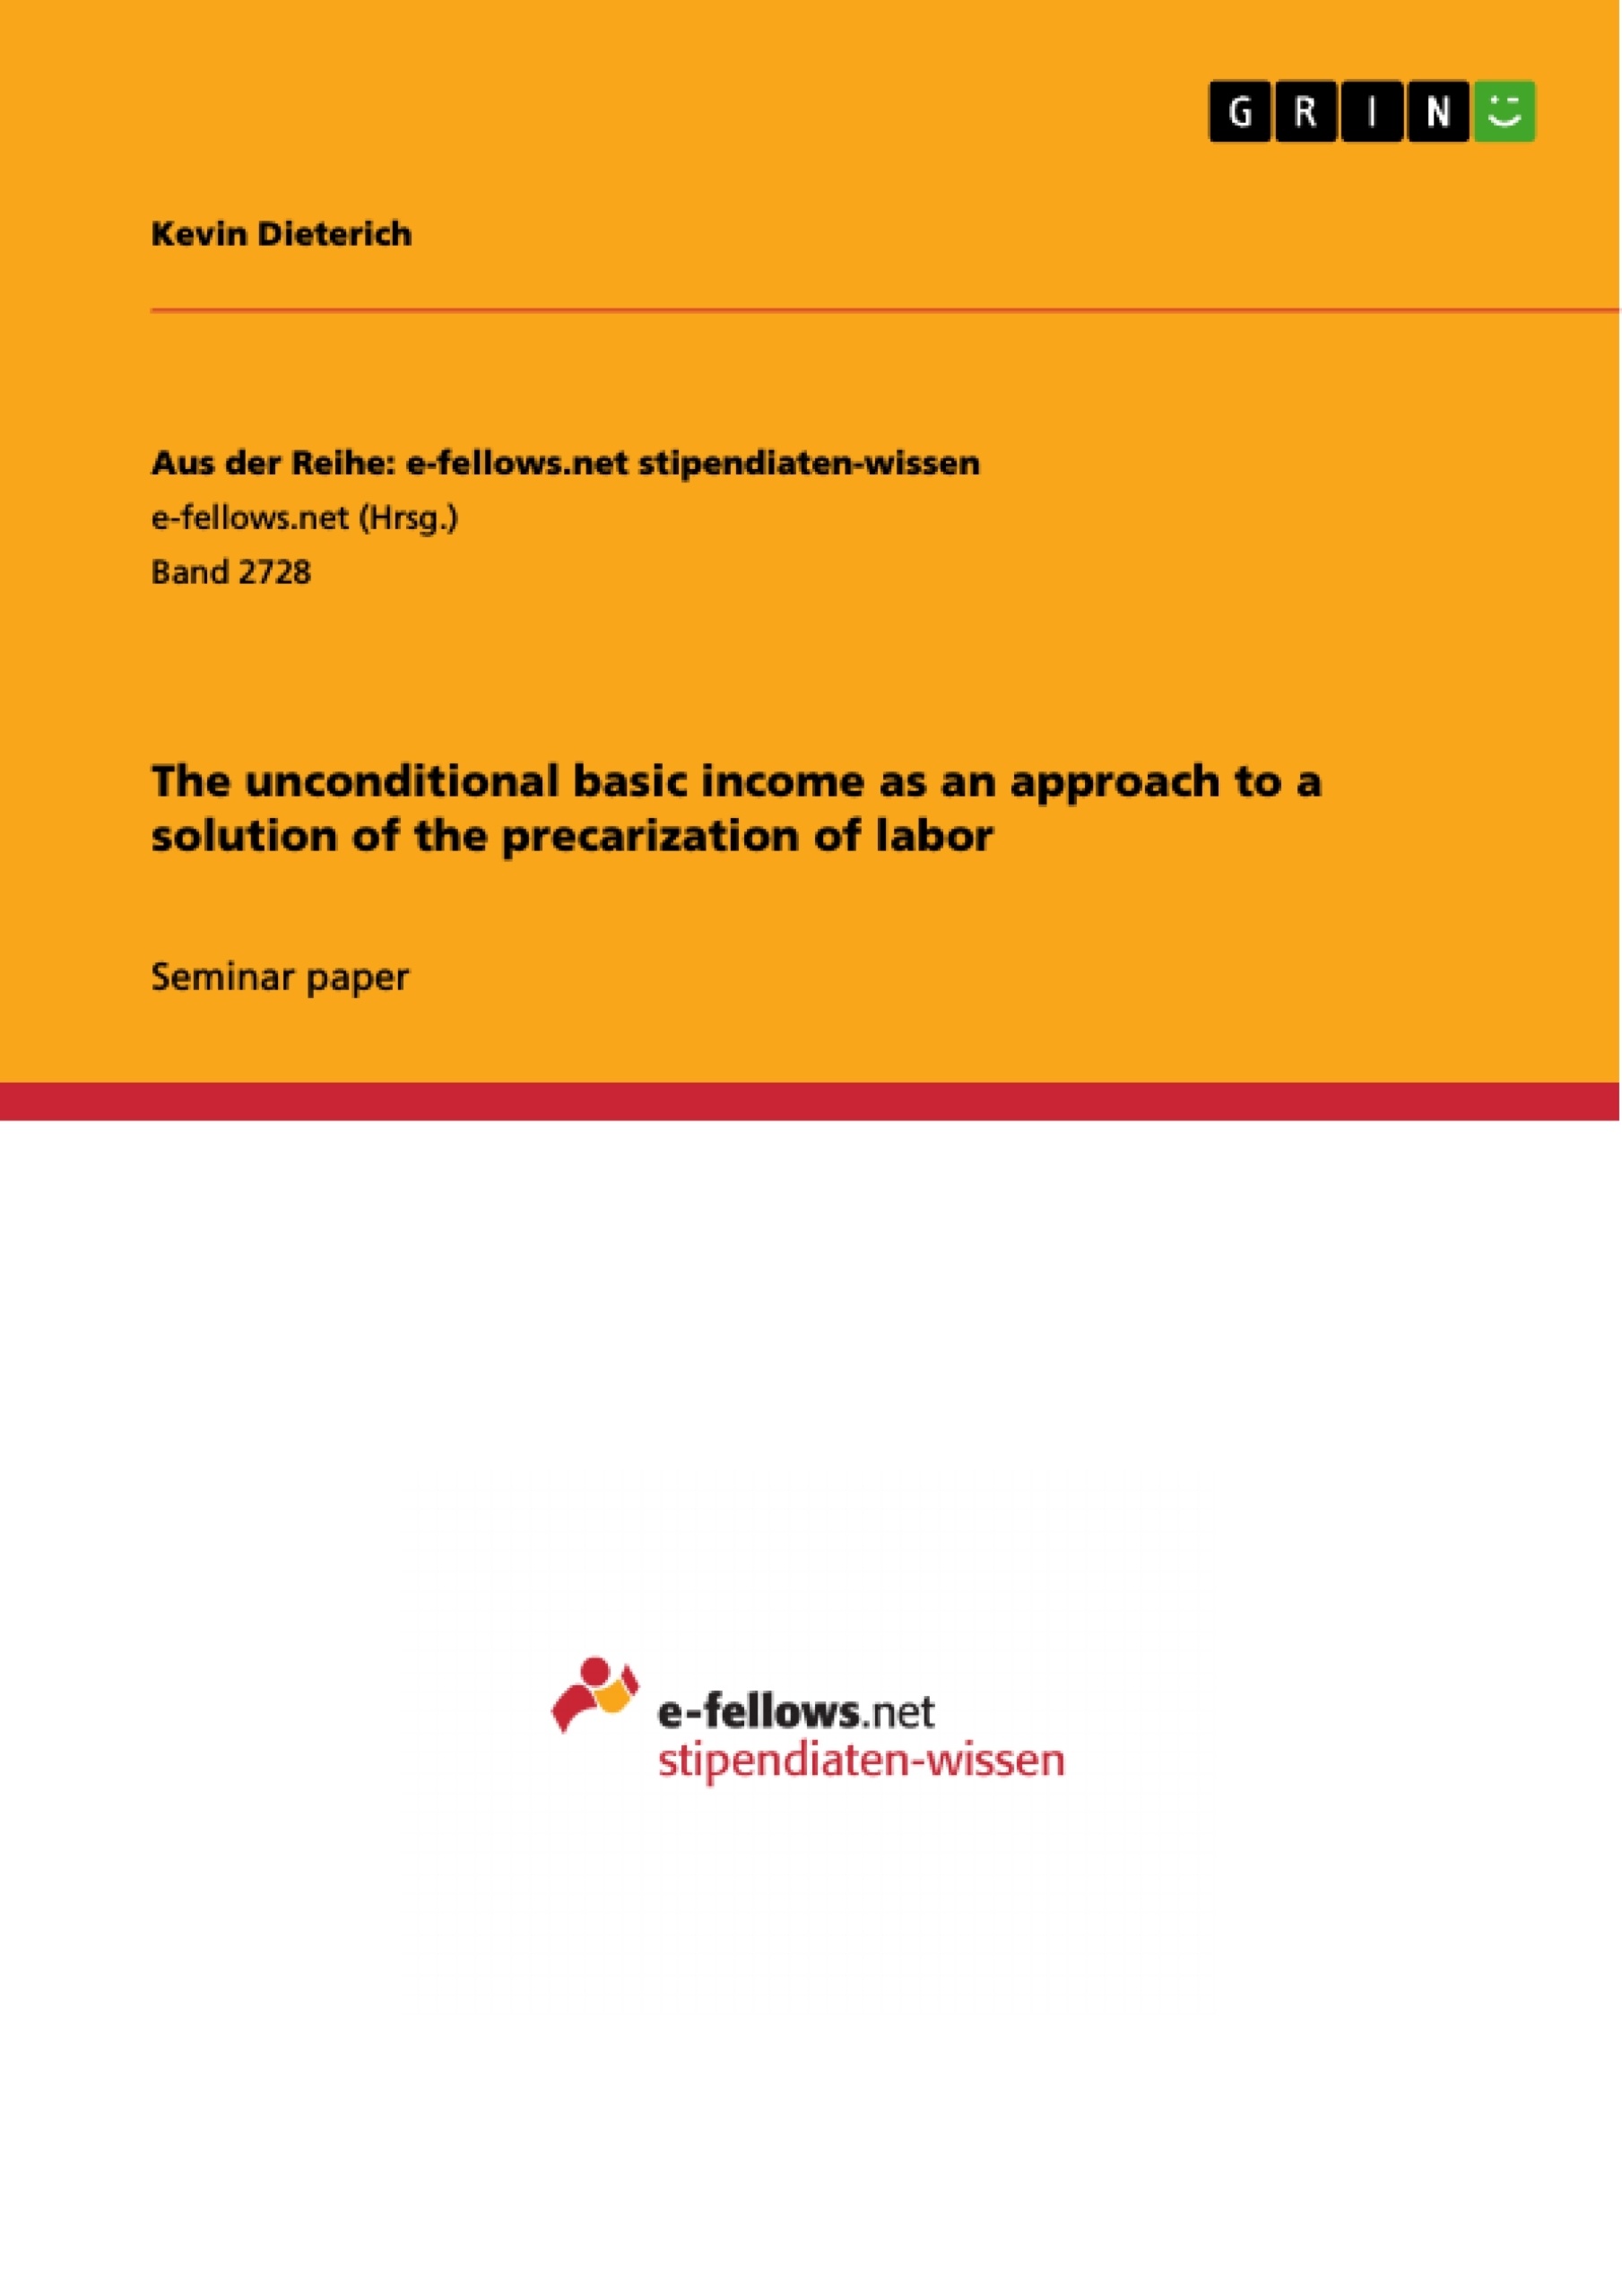 Título: The unconditional basic income as an approach to a solution of the precarization of labor